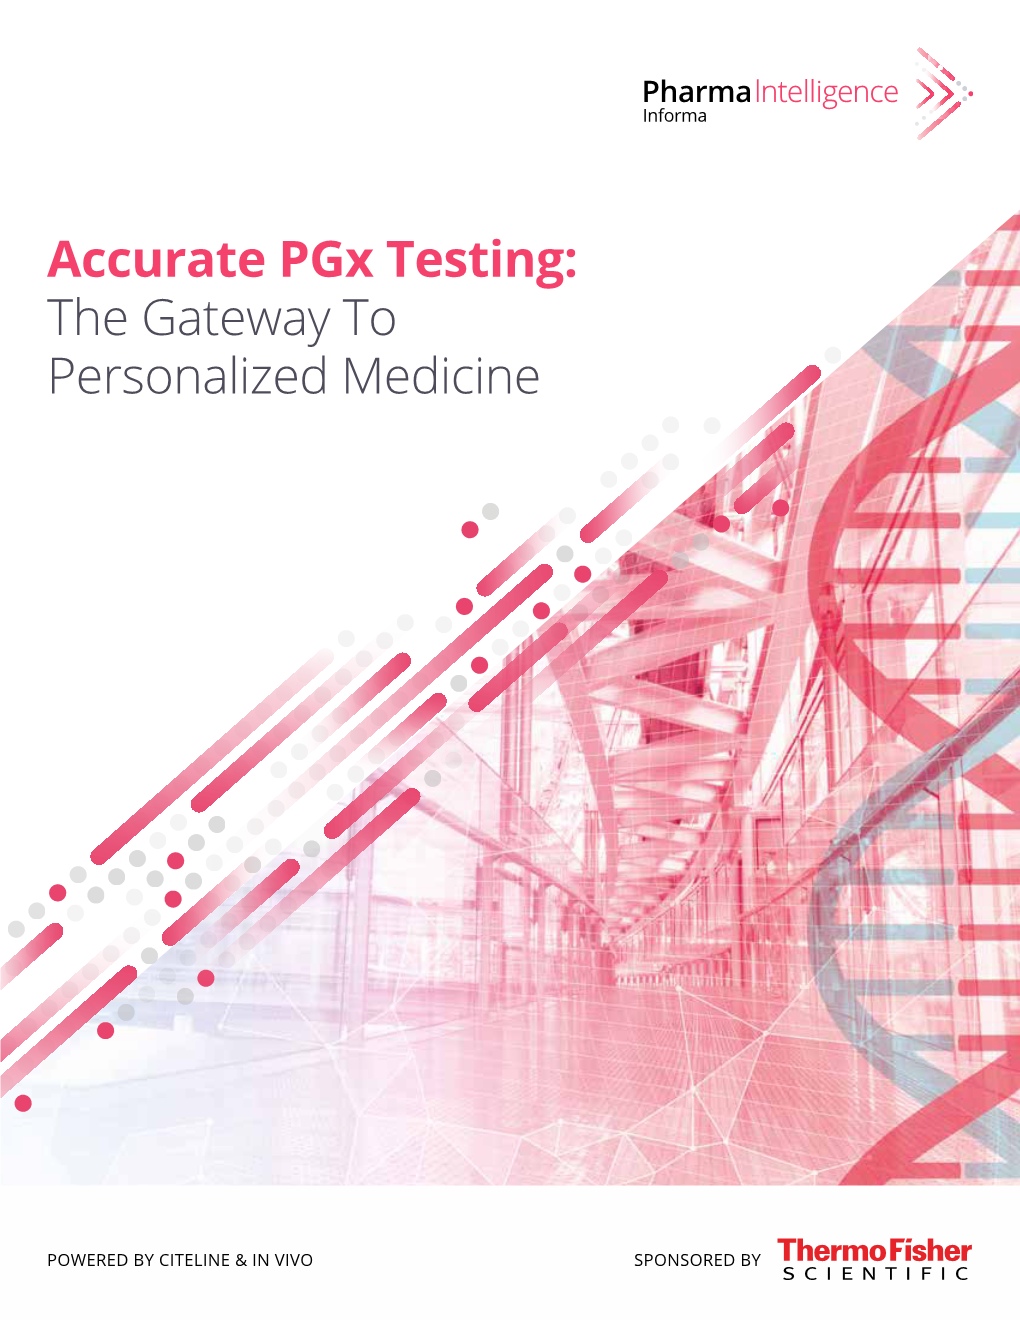 Accurate Pgx Testing: the Gateway to Personalized Medicine